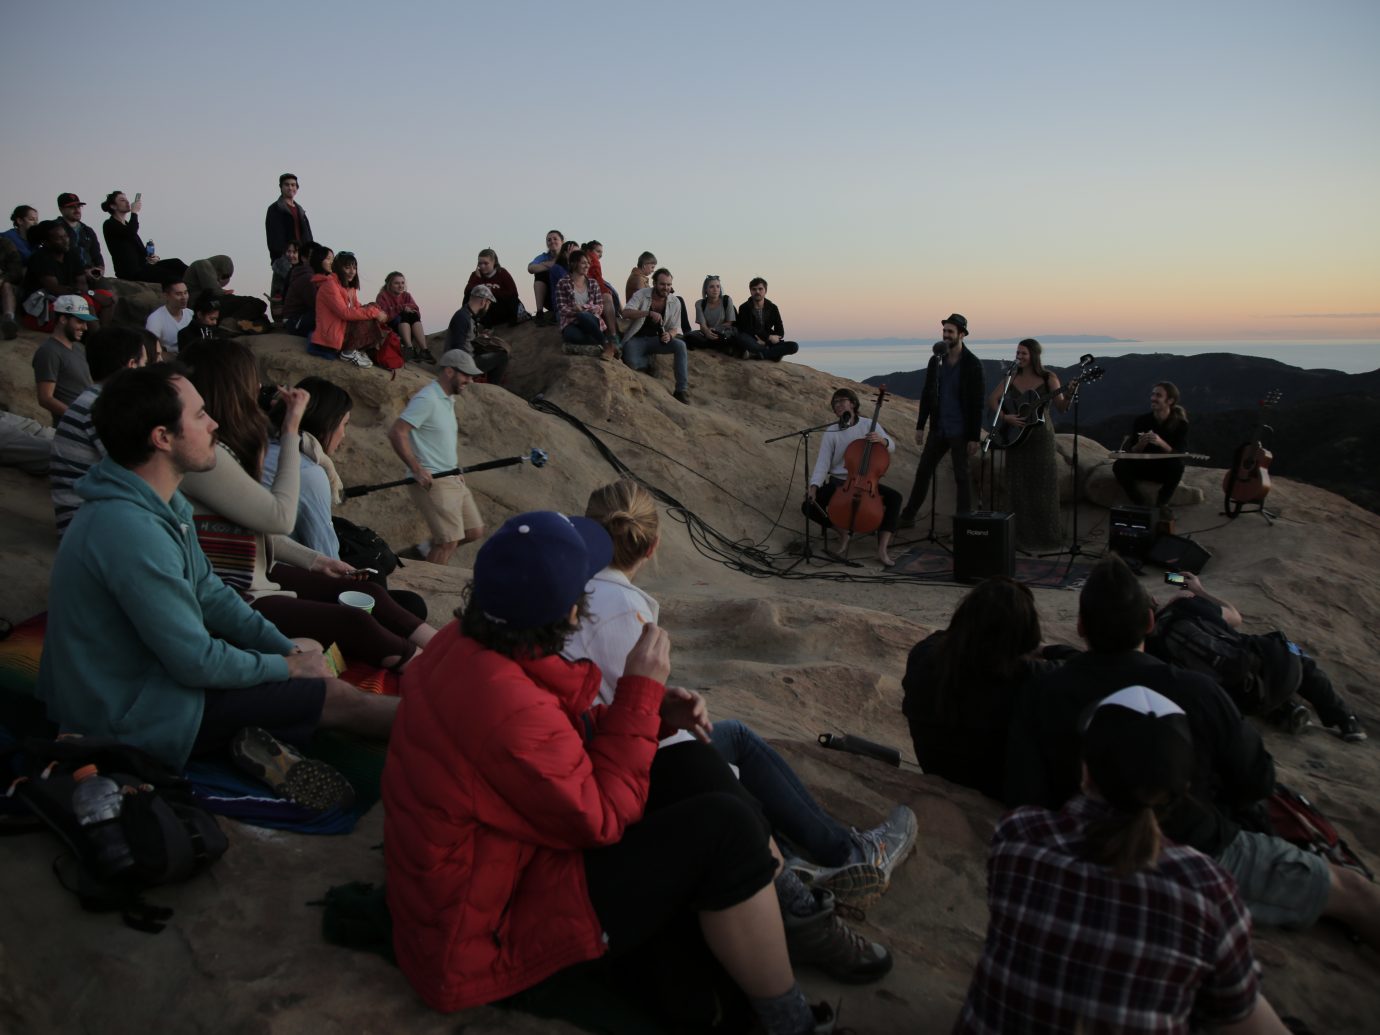 crowd at dusk on large rock watching people perform